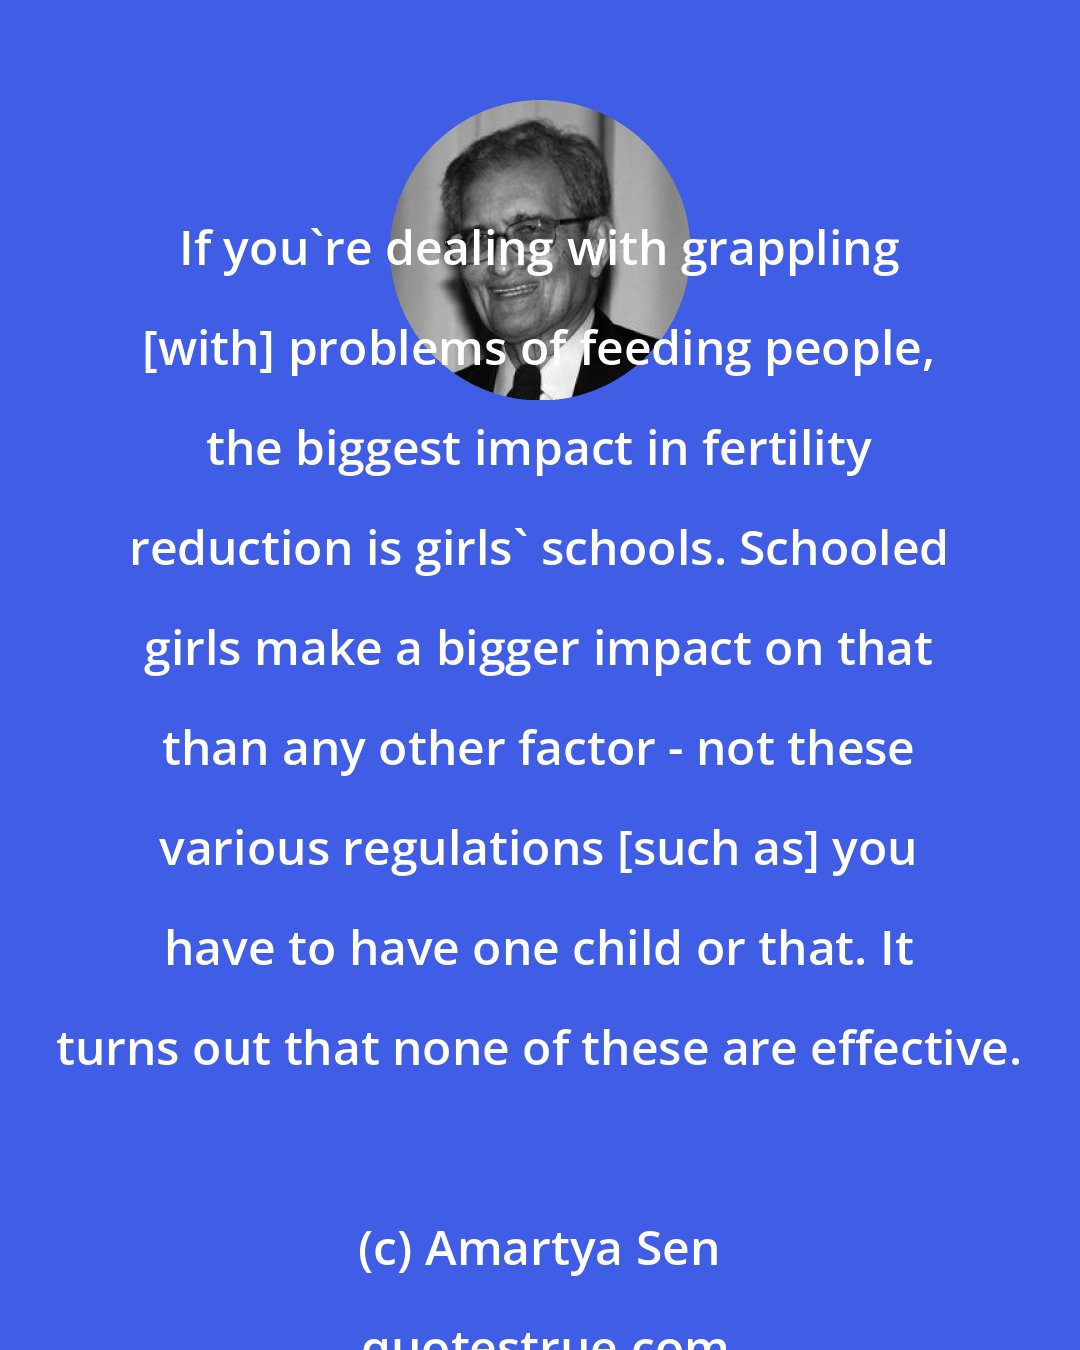 Amartya Sen: If you're dealing with grappling [with] problems of feeding people, the biggest impact in fertility reduction is girls' schools. Schooled girls make a bigger impact on that than any other factor - not these various regulations [such as] you have to have one child or that. It turns out that none of these are effective.